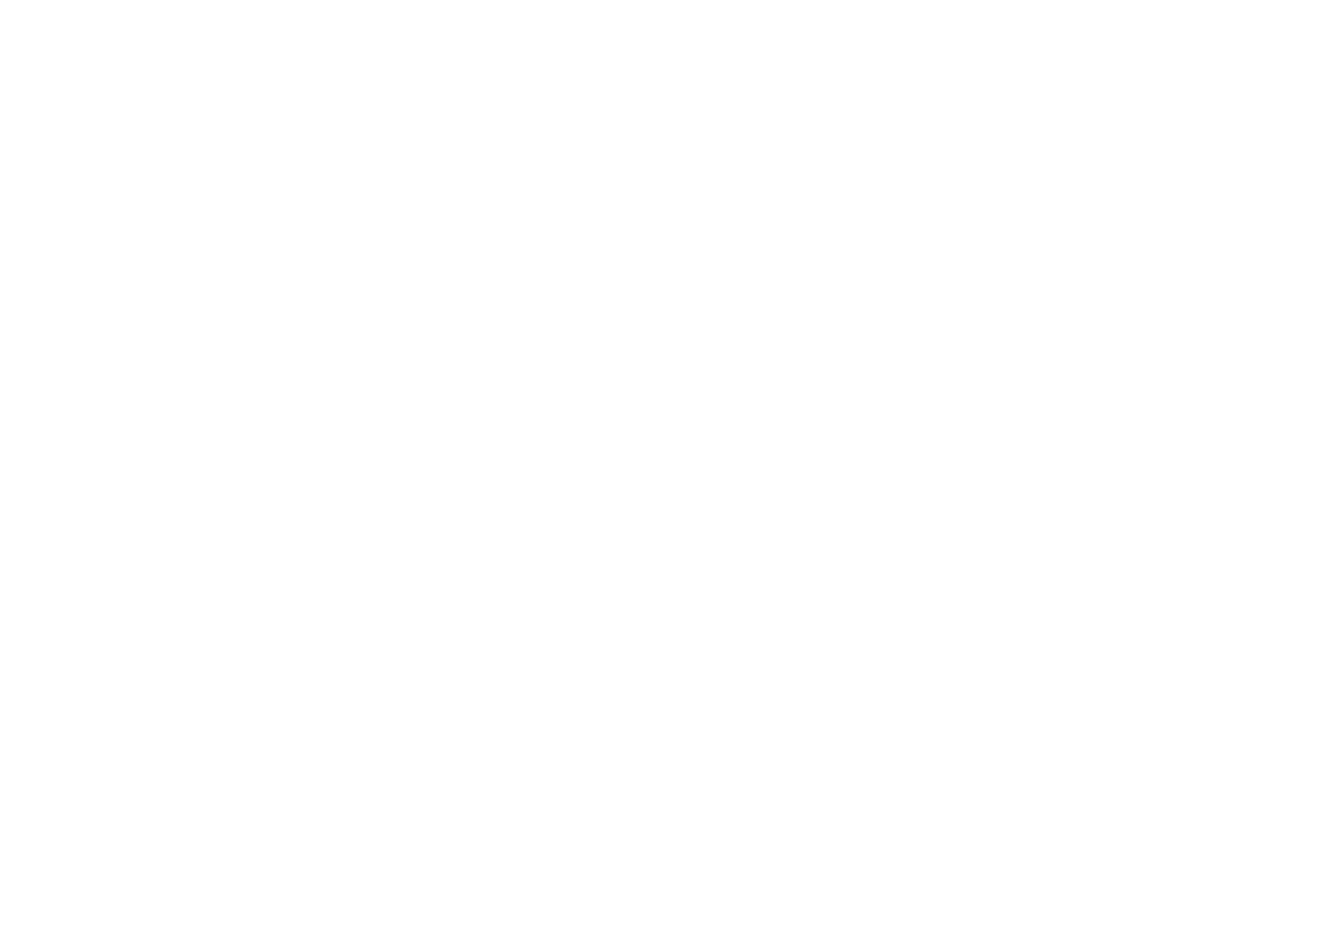 Linville Falls Winery 